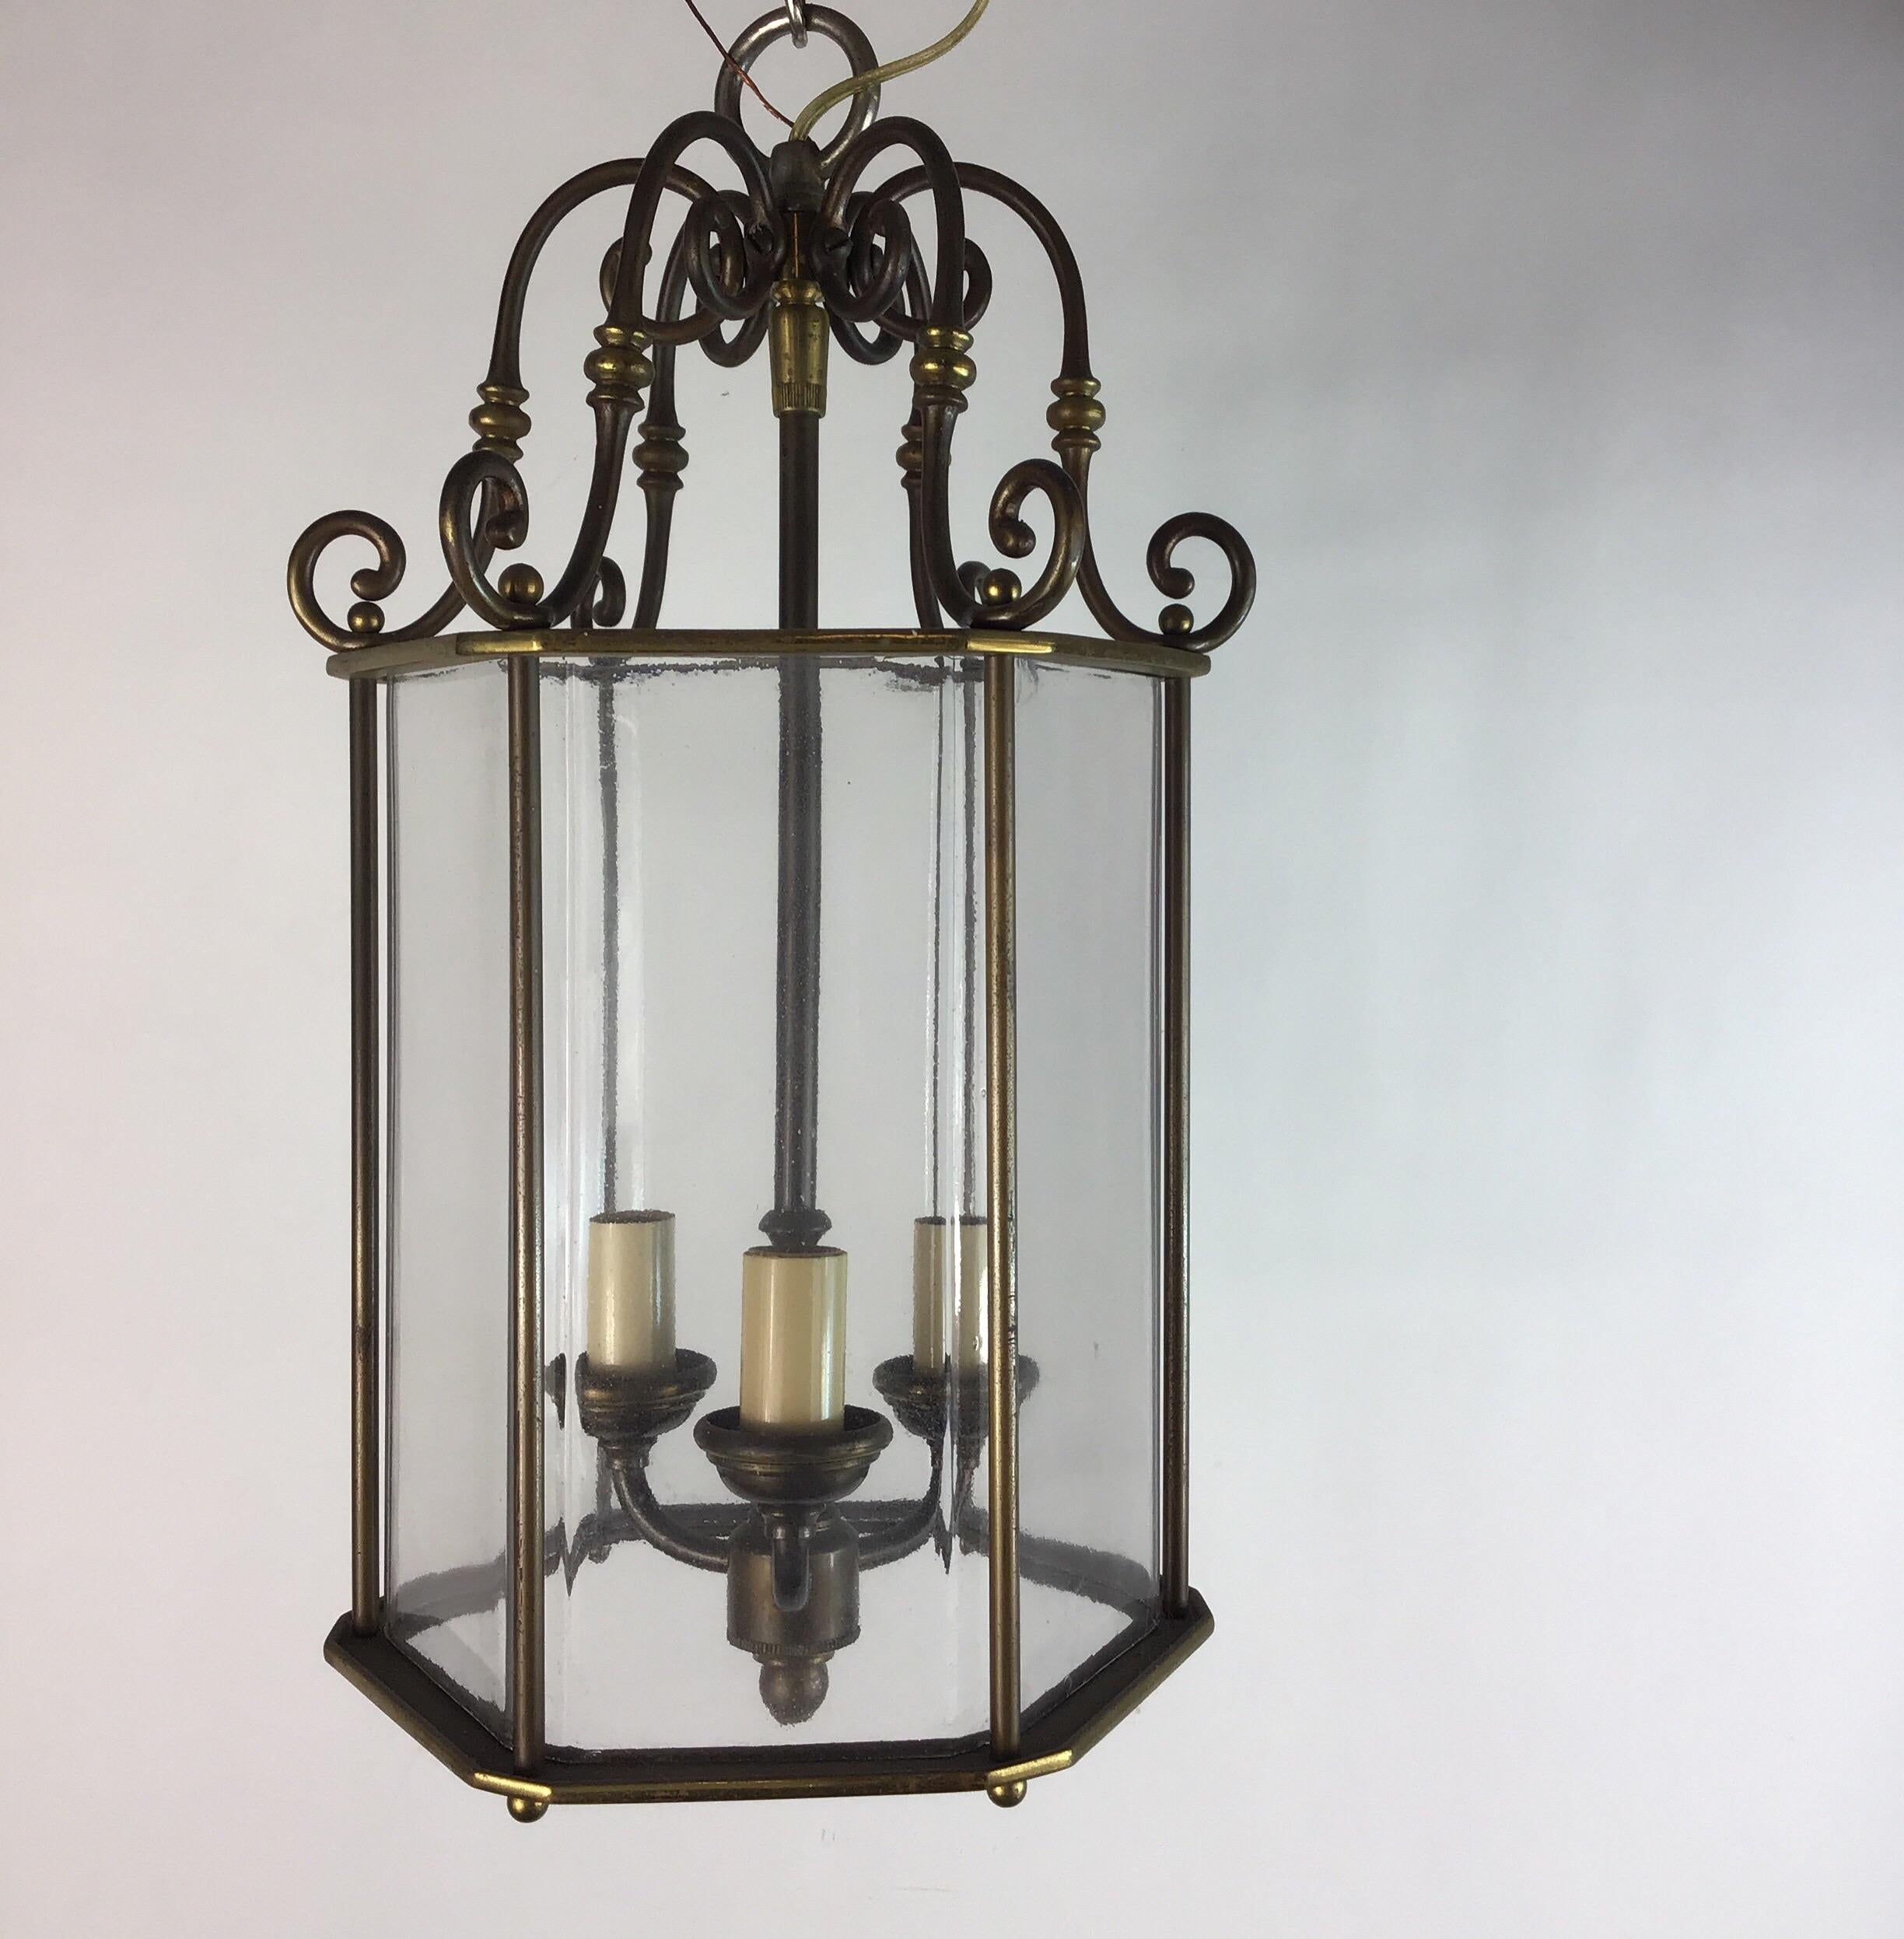 1-3056 English  patented brass hexagonal lantern with solid one piece glass shade. Three 40 W candelabra base bulbs. Newly rewired.